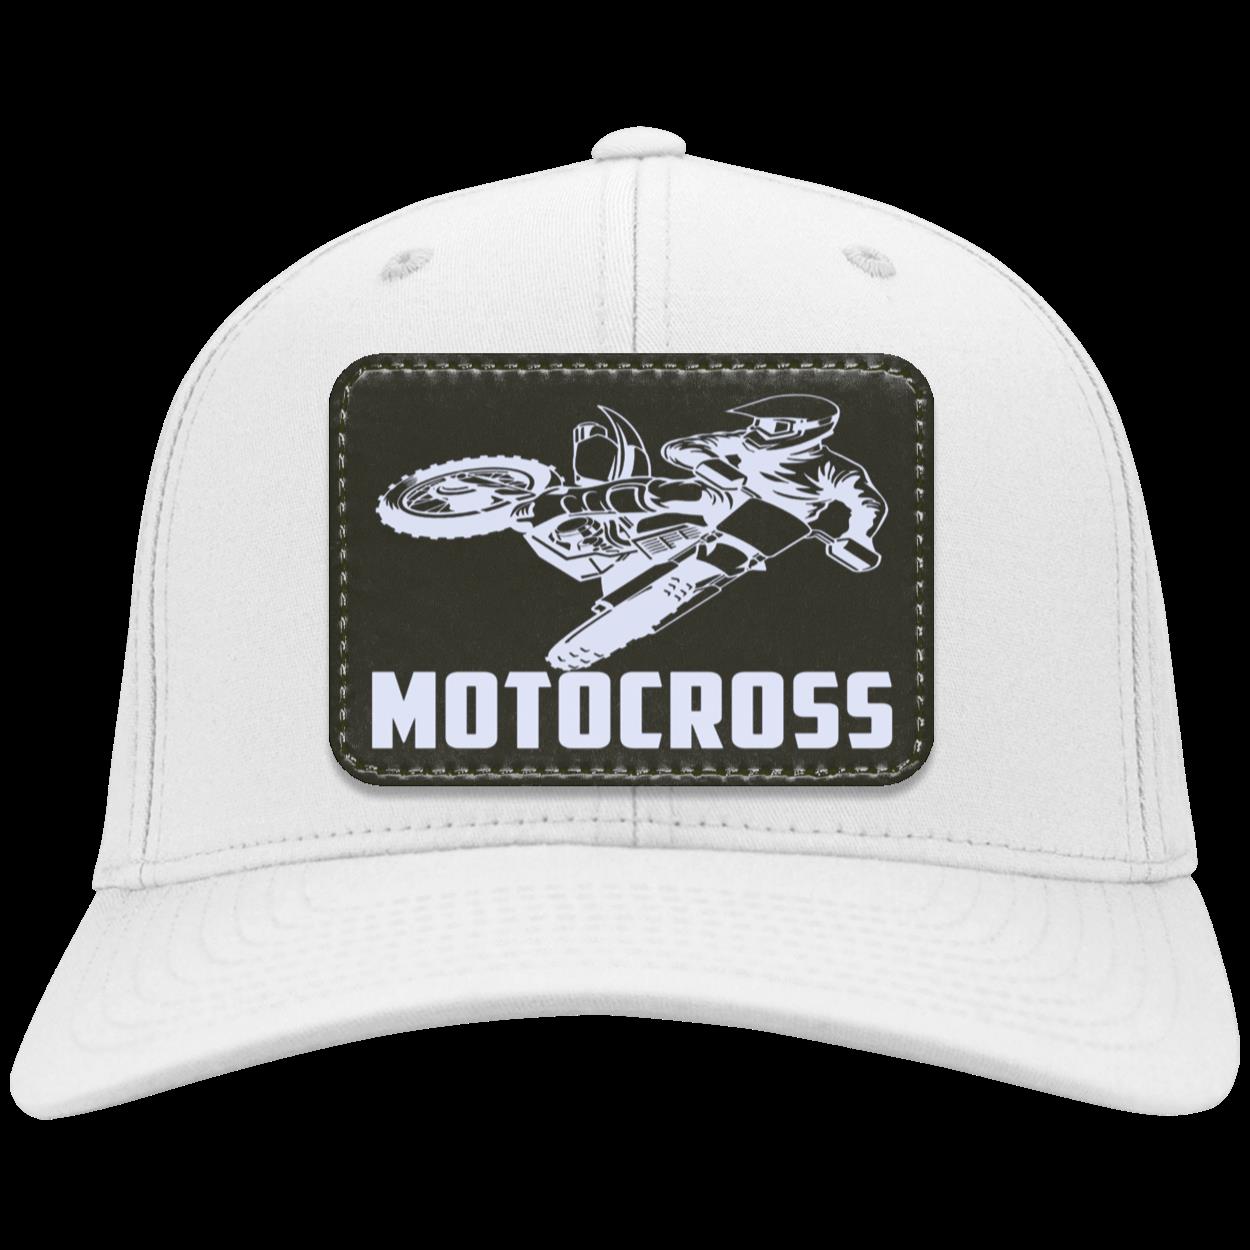 Motocross Patched Twill Cap